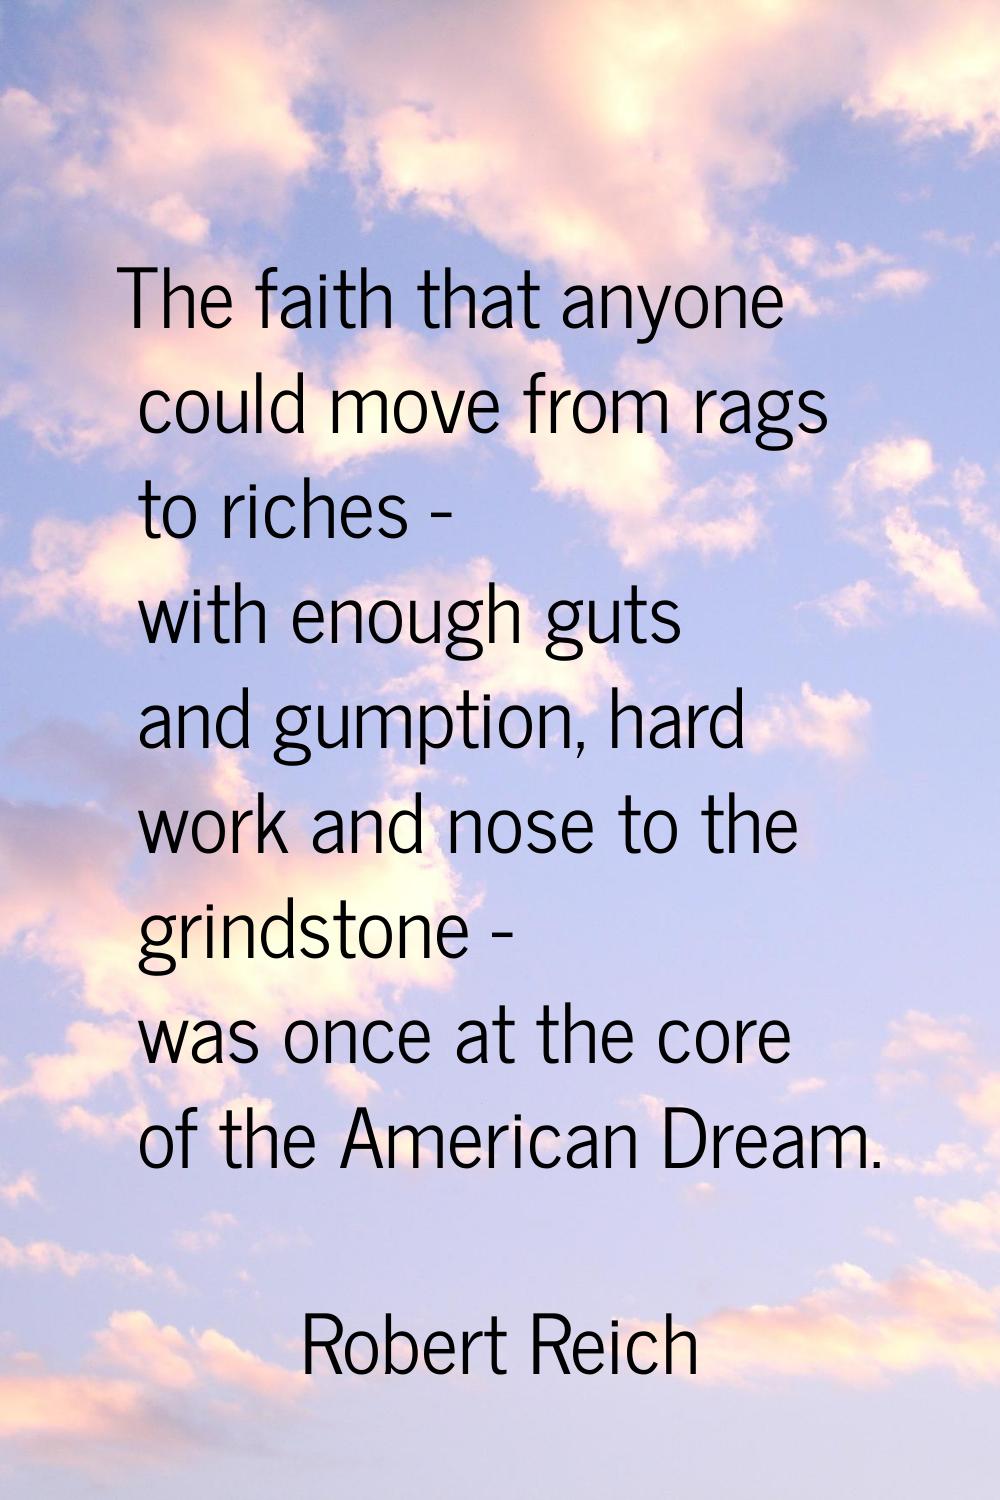 The faith that anyone could move from rags to riches - with enough guts and gumption, hard work and